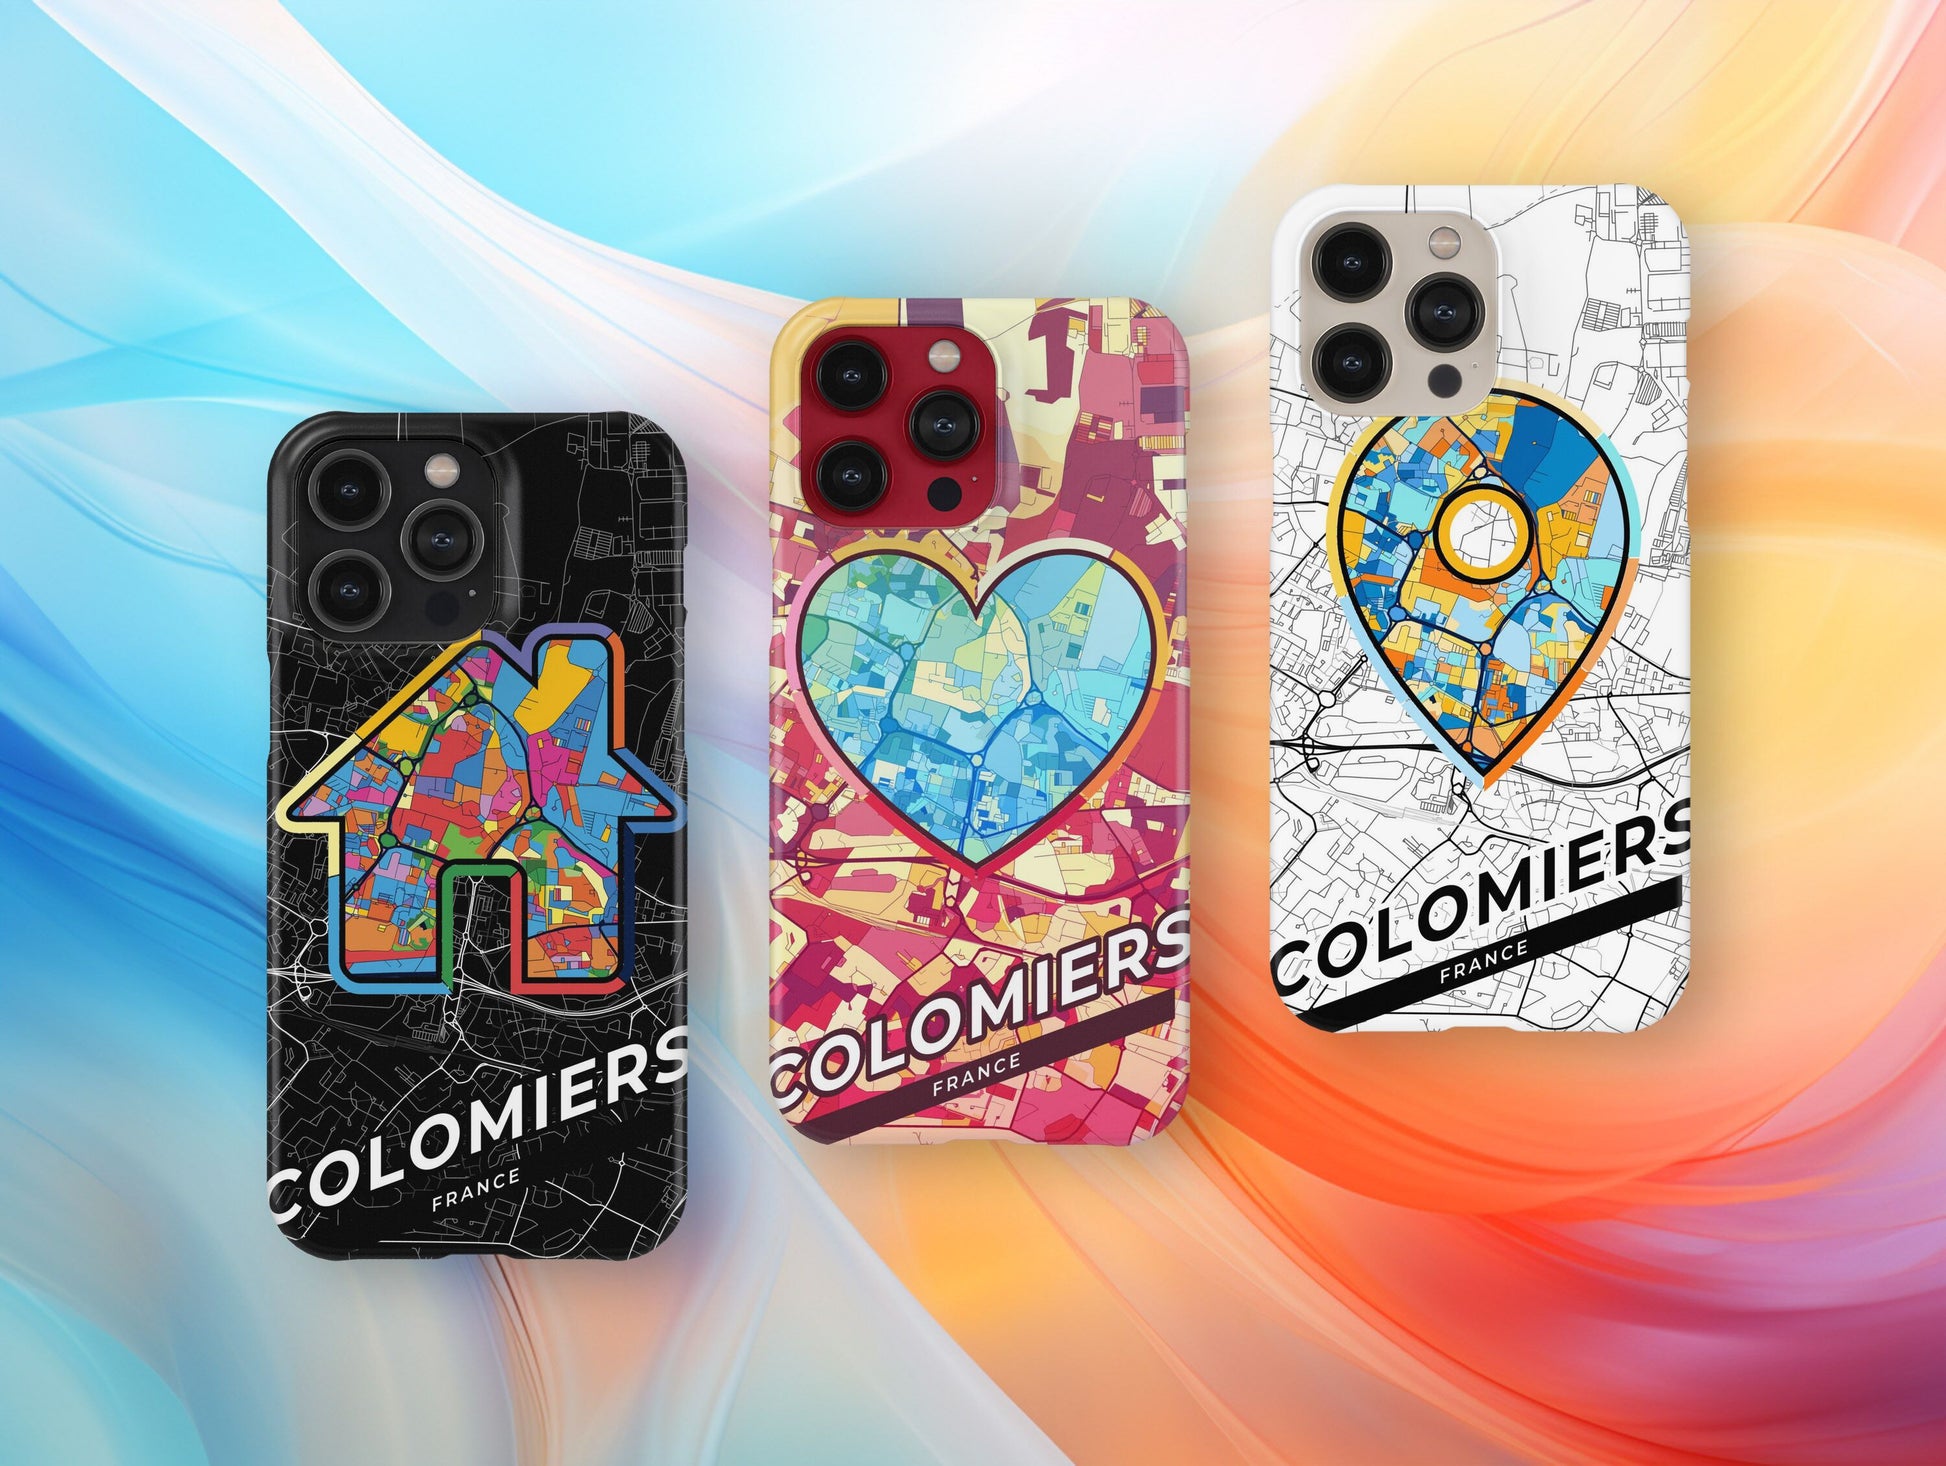 Colomiers France slim phone case with colorful icon. Birthday, wedding or housewarming gift. Couple match cases.